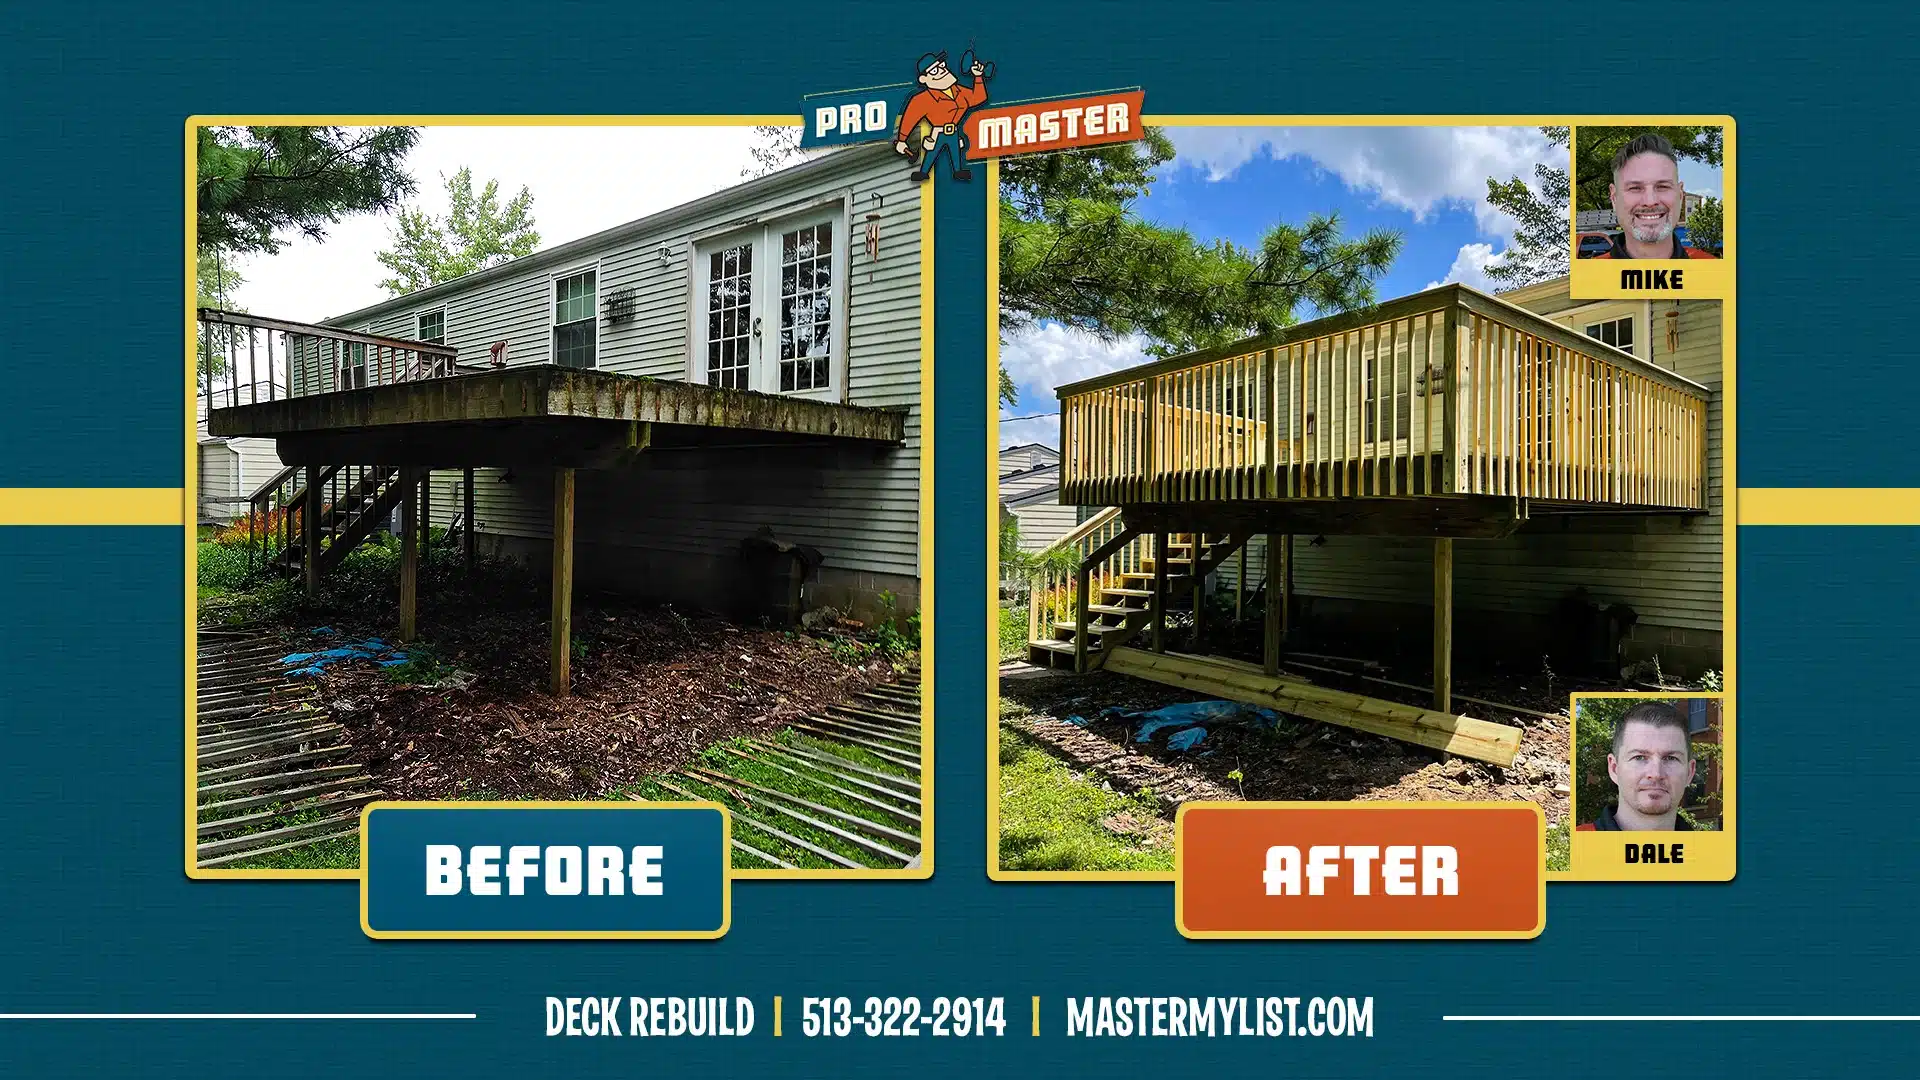 Before and After Image of deck build by ProMaster Home Repair of Cincinnati.